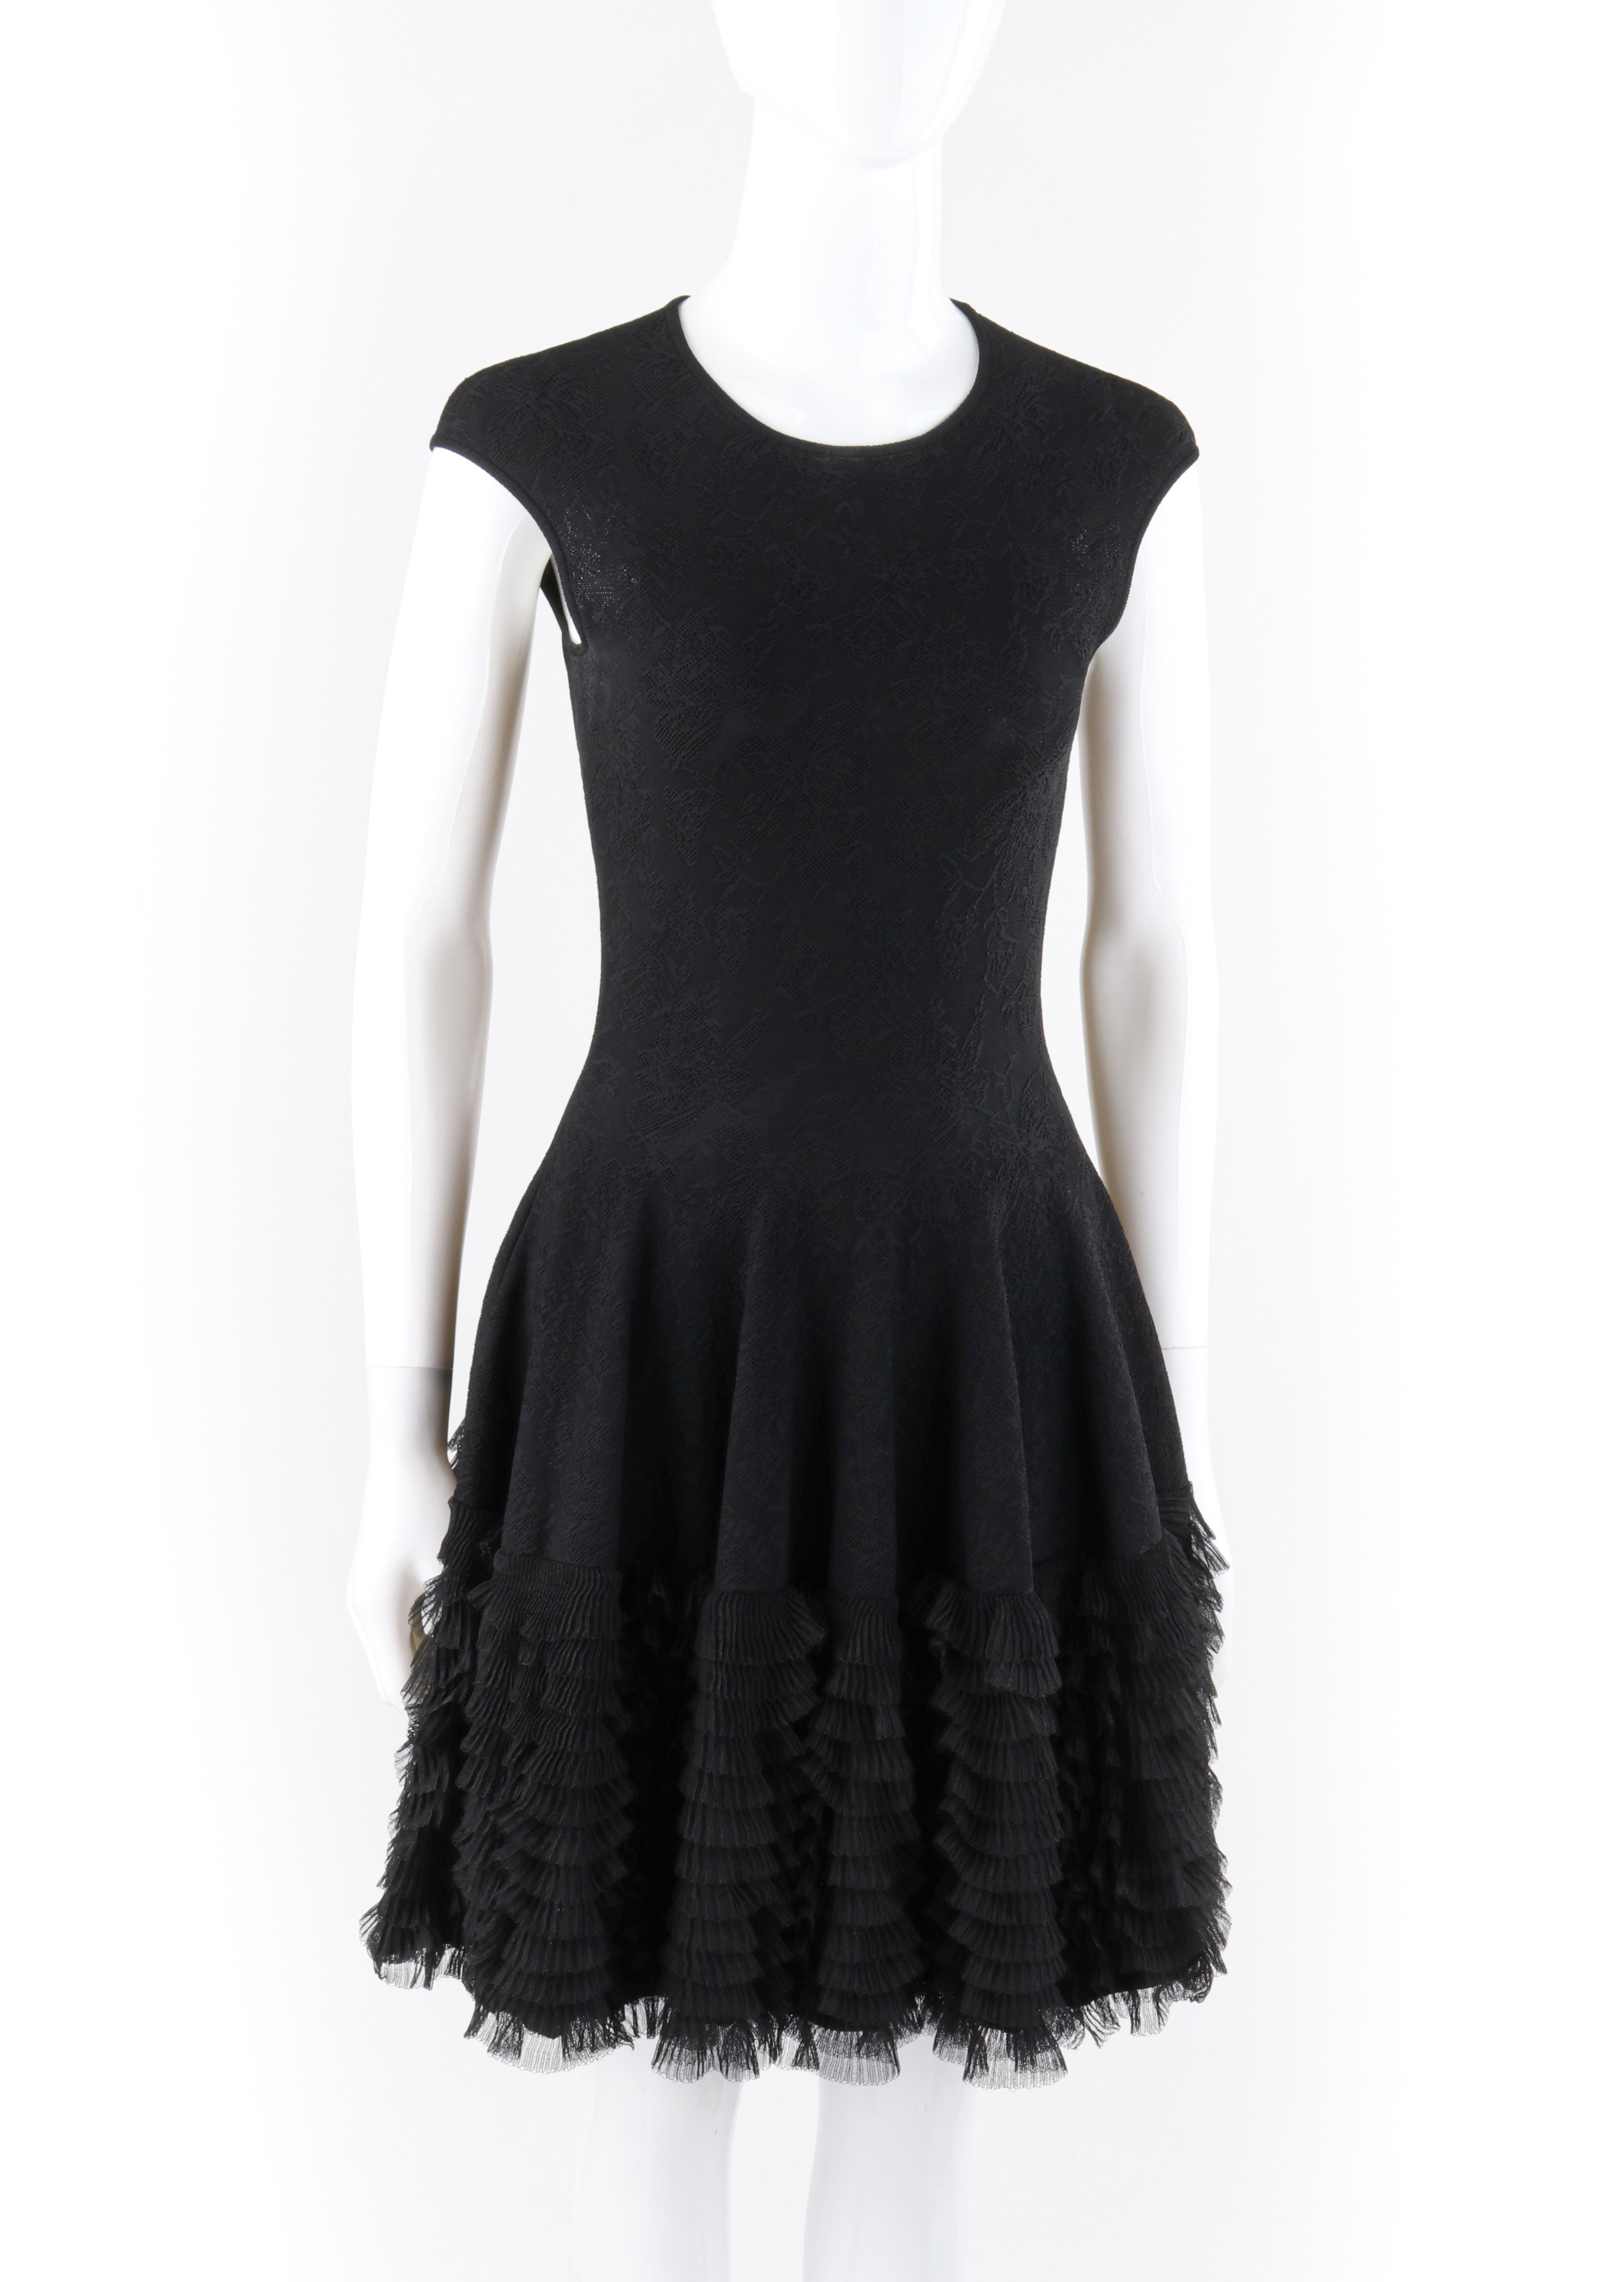 ALEXANDER McQUEEN A/W 2008 Floral Lace Knit Fit & Flare Ruffle Layer Skirt Dress

Brand / Manufacturer: Alexander McQueen
Collection: A/W 2008
Designer: Alexander McQueen
Style: Fit n Flare dress
Color(s): Black
Lined: No
Unmarked Fabric Content: